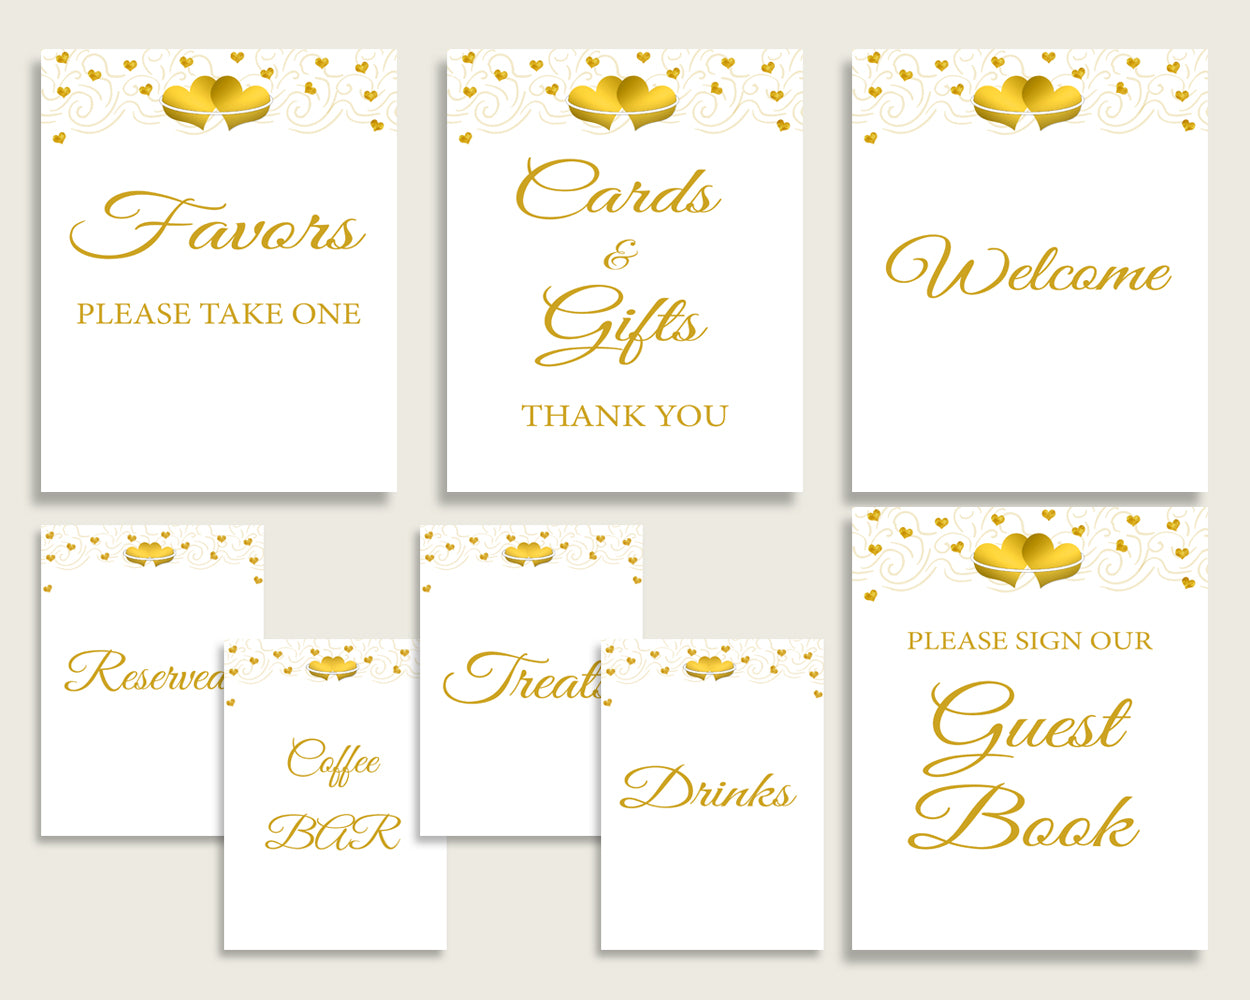 Table Signs Bridal Shower Table Signs Gold Hearts Bridal Shower Table Signs Bridal Shower Gold Hearts Table Signs White Gold prints 6GQOT